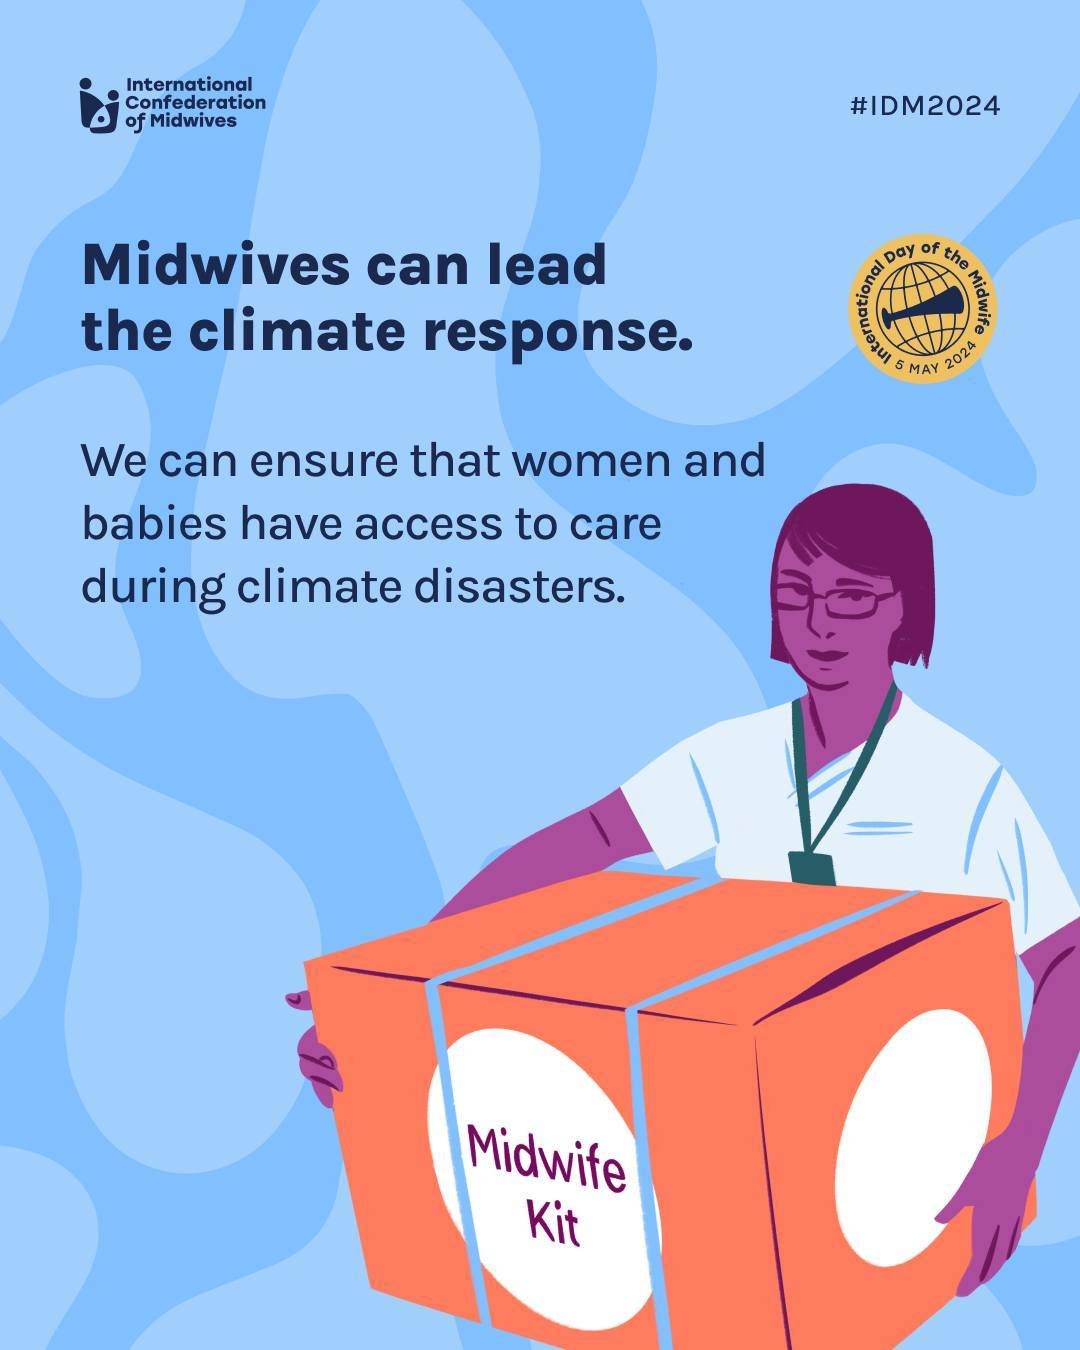 Community-based midwives can more easily reach areas affected by climate disasters 💪️, and quickly provide essential reproductive and maternal health services. We are a valuable network for evidence-based information and supply distribution, ensurin